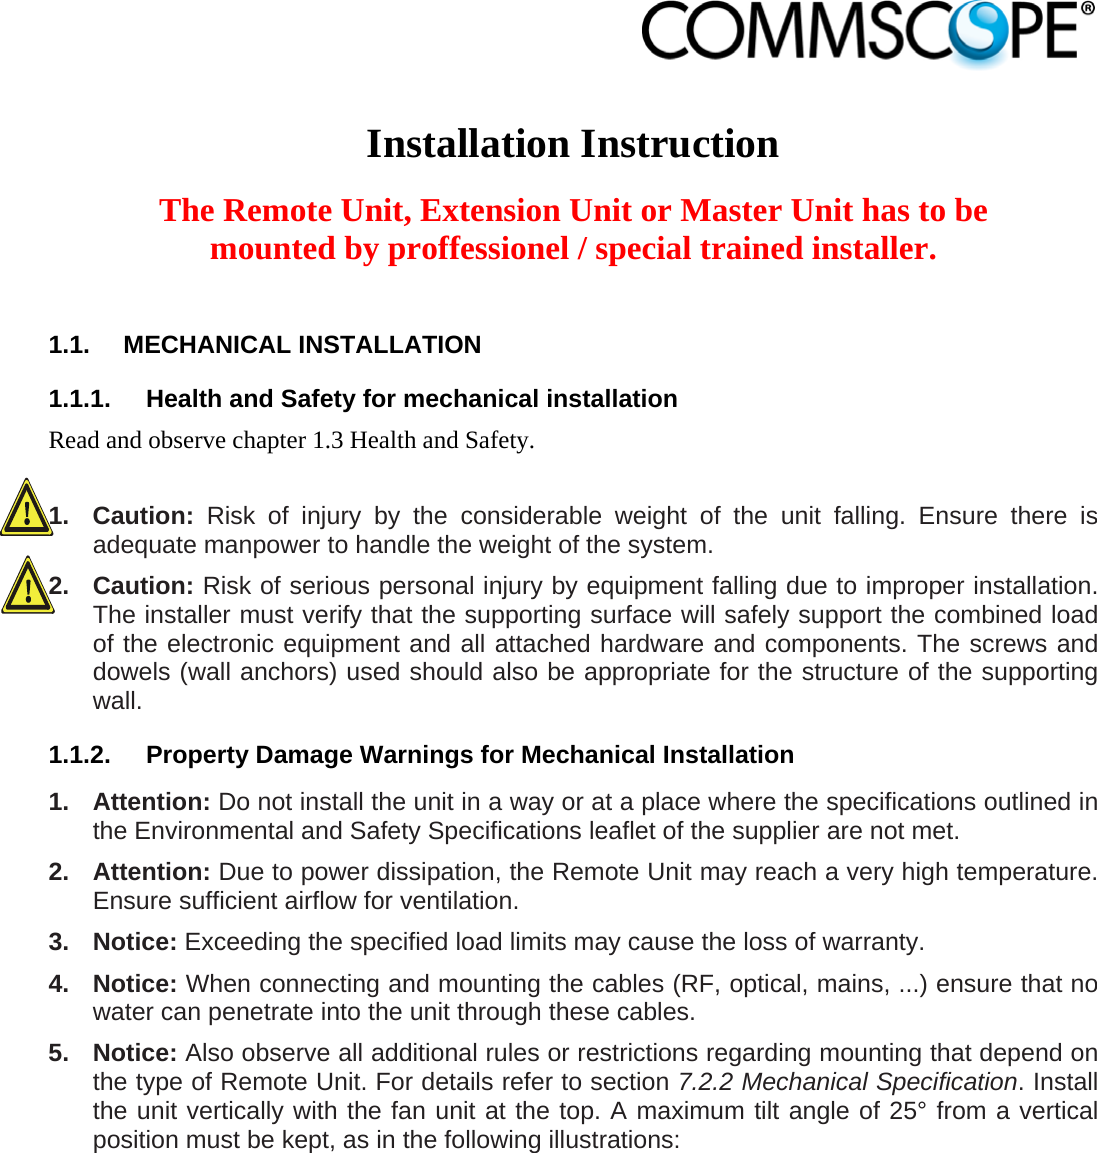                             Installation Instruction  The Remote Unit, Extension Unit or Master Unit has to be mounted by proffessionel / special trained installer.  1.1. MECHANICAL INSTALLATION 1.1.1.  Health and Safety for mechanical installation Read and observe chapter 1.3 Health and Safety.  1. Caution: Risk of injury by the considerable weight of the unit falling. Ensure there is adequate manpower to handle the weight of the system. 2. Caution: Risk of serious personal injury by equipment falling due to improper installation. The installer must verify that the supporting surface will safely support the combined load of the electronic equipment and all attached hardware and components. The screws and dowels (wall anchors) used should also be appropriate for the structure of the supporting wall. 1.1.2.  Property Damage Warnings for Mechanical Installation 1. Attention: Do not install the unit in a way or at a place where the specifications outlined in the Environmental and Safety Specifications leaflet of the supplier are not met. 2. Attention: Due to power dissipation, the Remote Unit may reach a very high temperature. Ensure sufficient airflow for ventilation. 3. Notice: Exceeding the specified load limits may cause the loss of warranty. 4. Notice: When connecting and mounting the cables (RF, optical, mains, ...) ensure that no water can penetrate into the unit through these cables. 5. Notice: Also observe all additional rules or restrictions regarding mounting that depend on the type of Remote Unit. For details refer to section 7.2.2 Mechanical Specification. Install the unit vertically with the fan unit at the top. A maximum tilt angle of 25° from a vertical position must be kept, as in the following illustrations: 